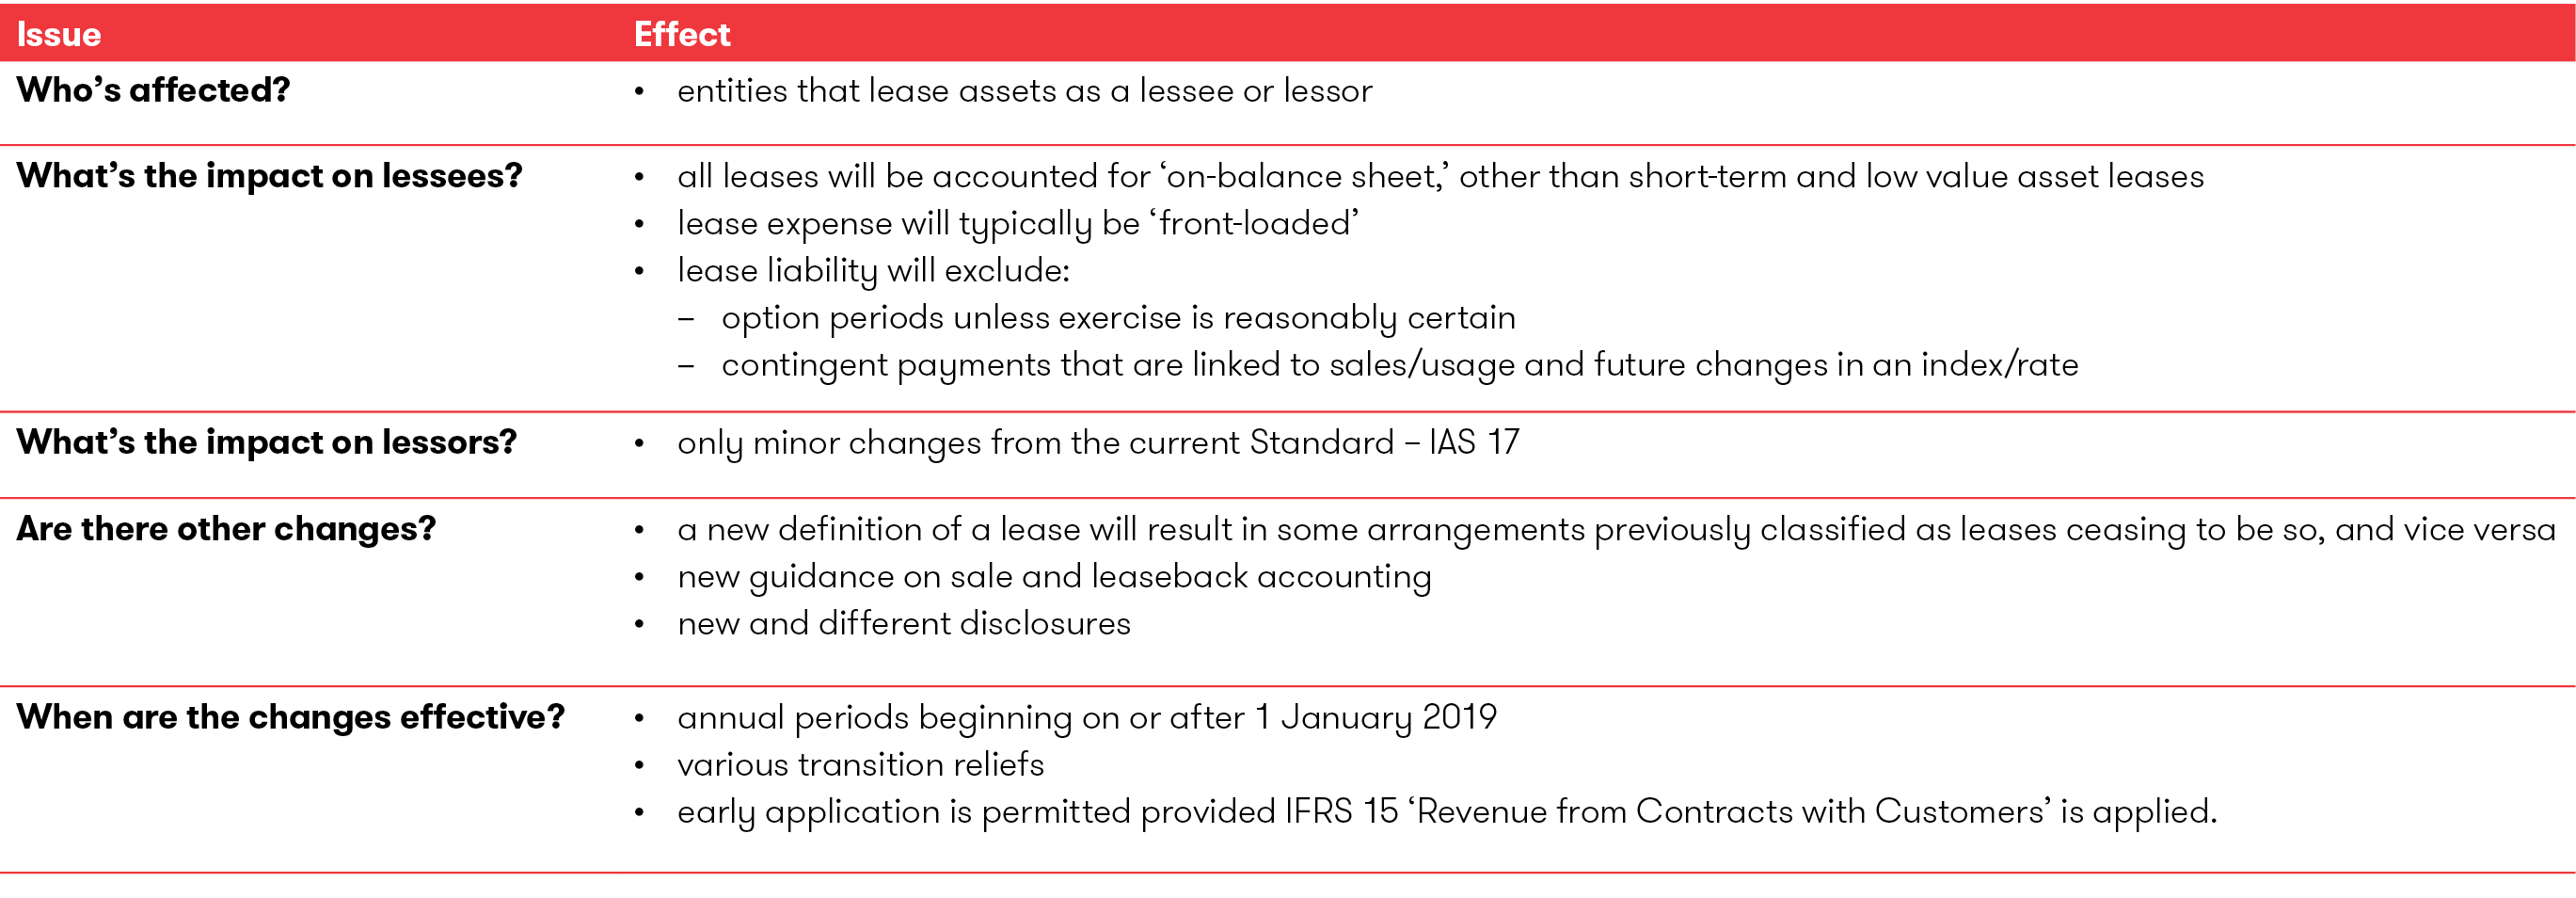 History And Overview Of Ifrs 16 Grant Thornton